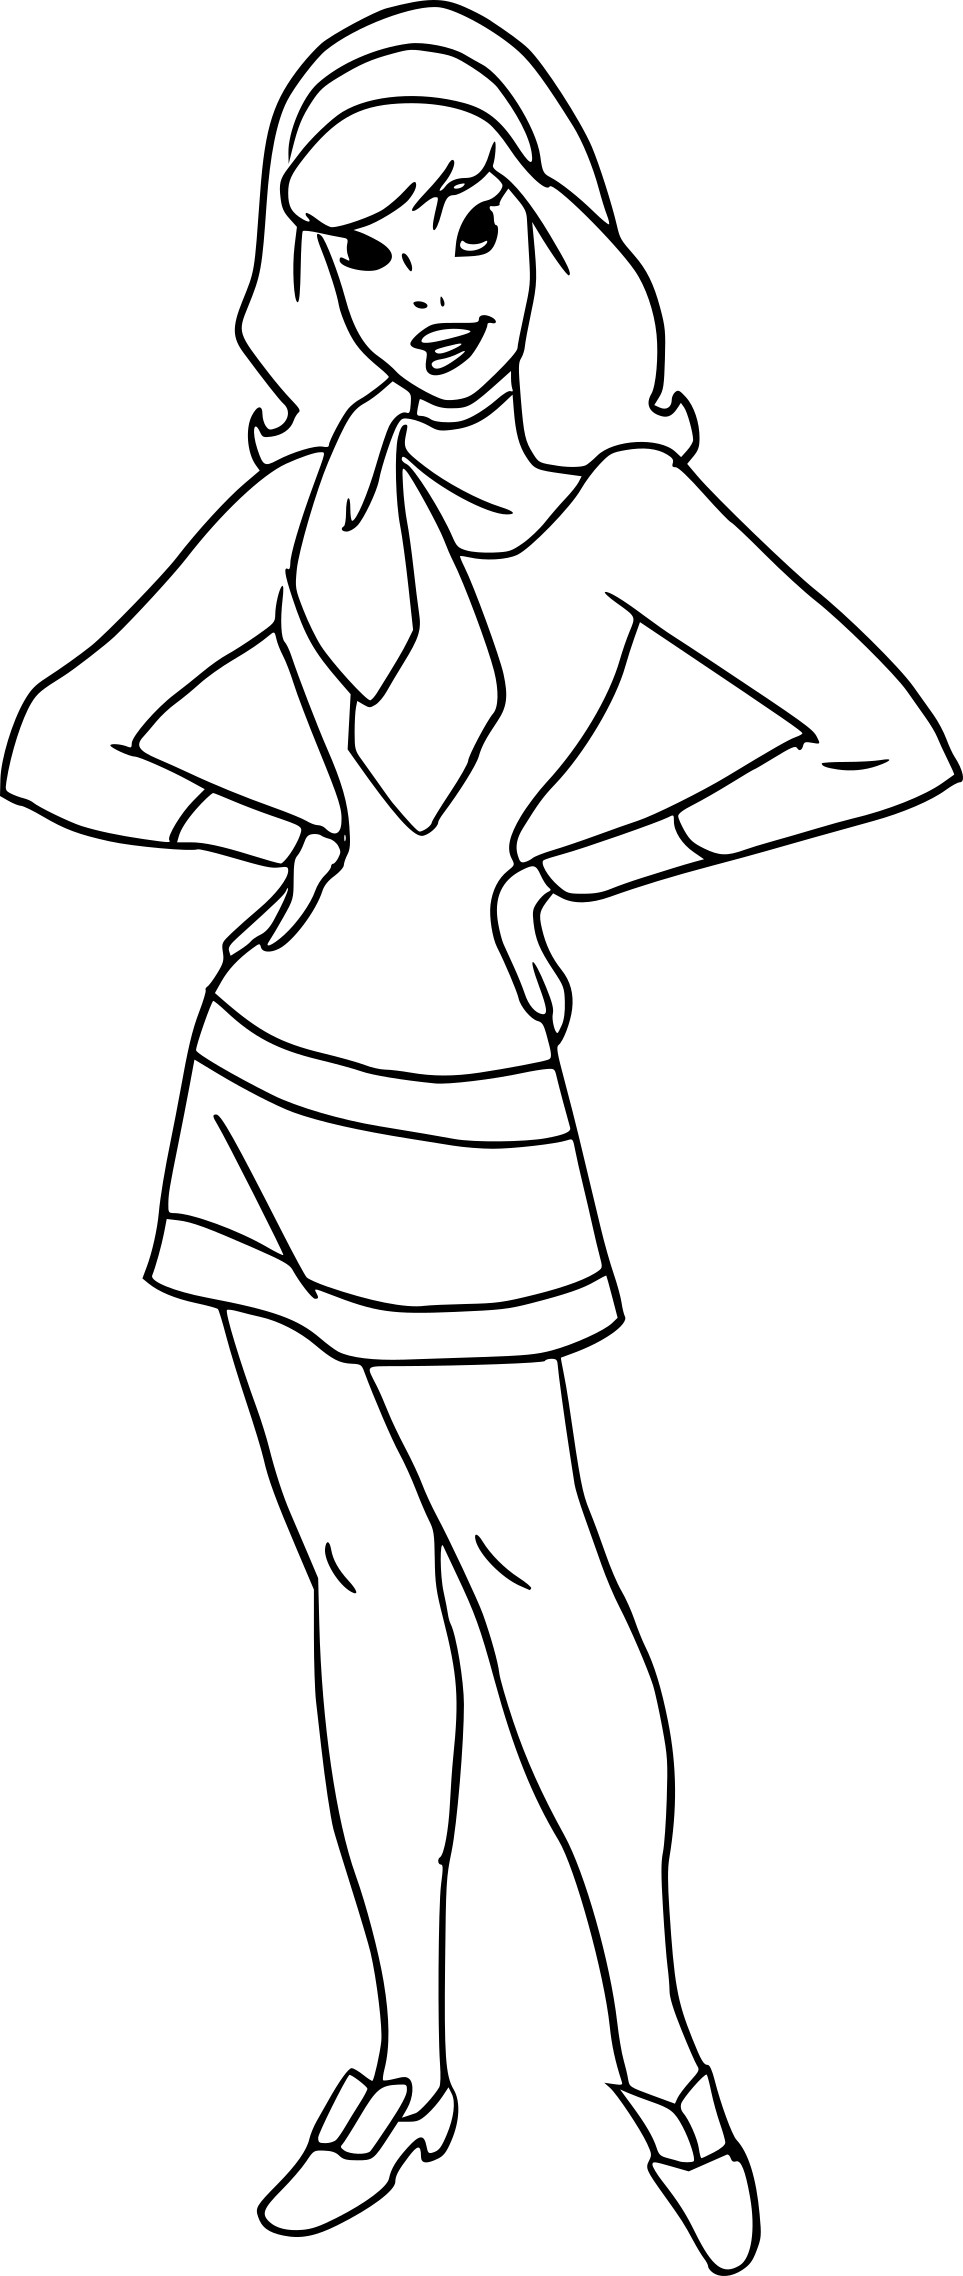 Daphne Scooby Doo coloring page